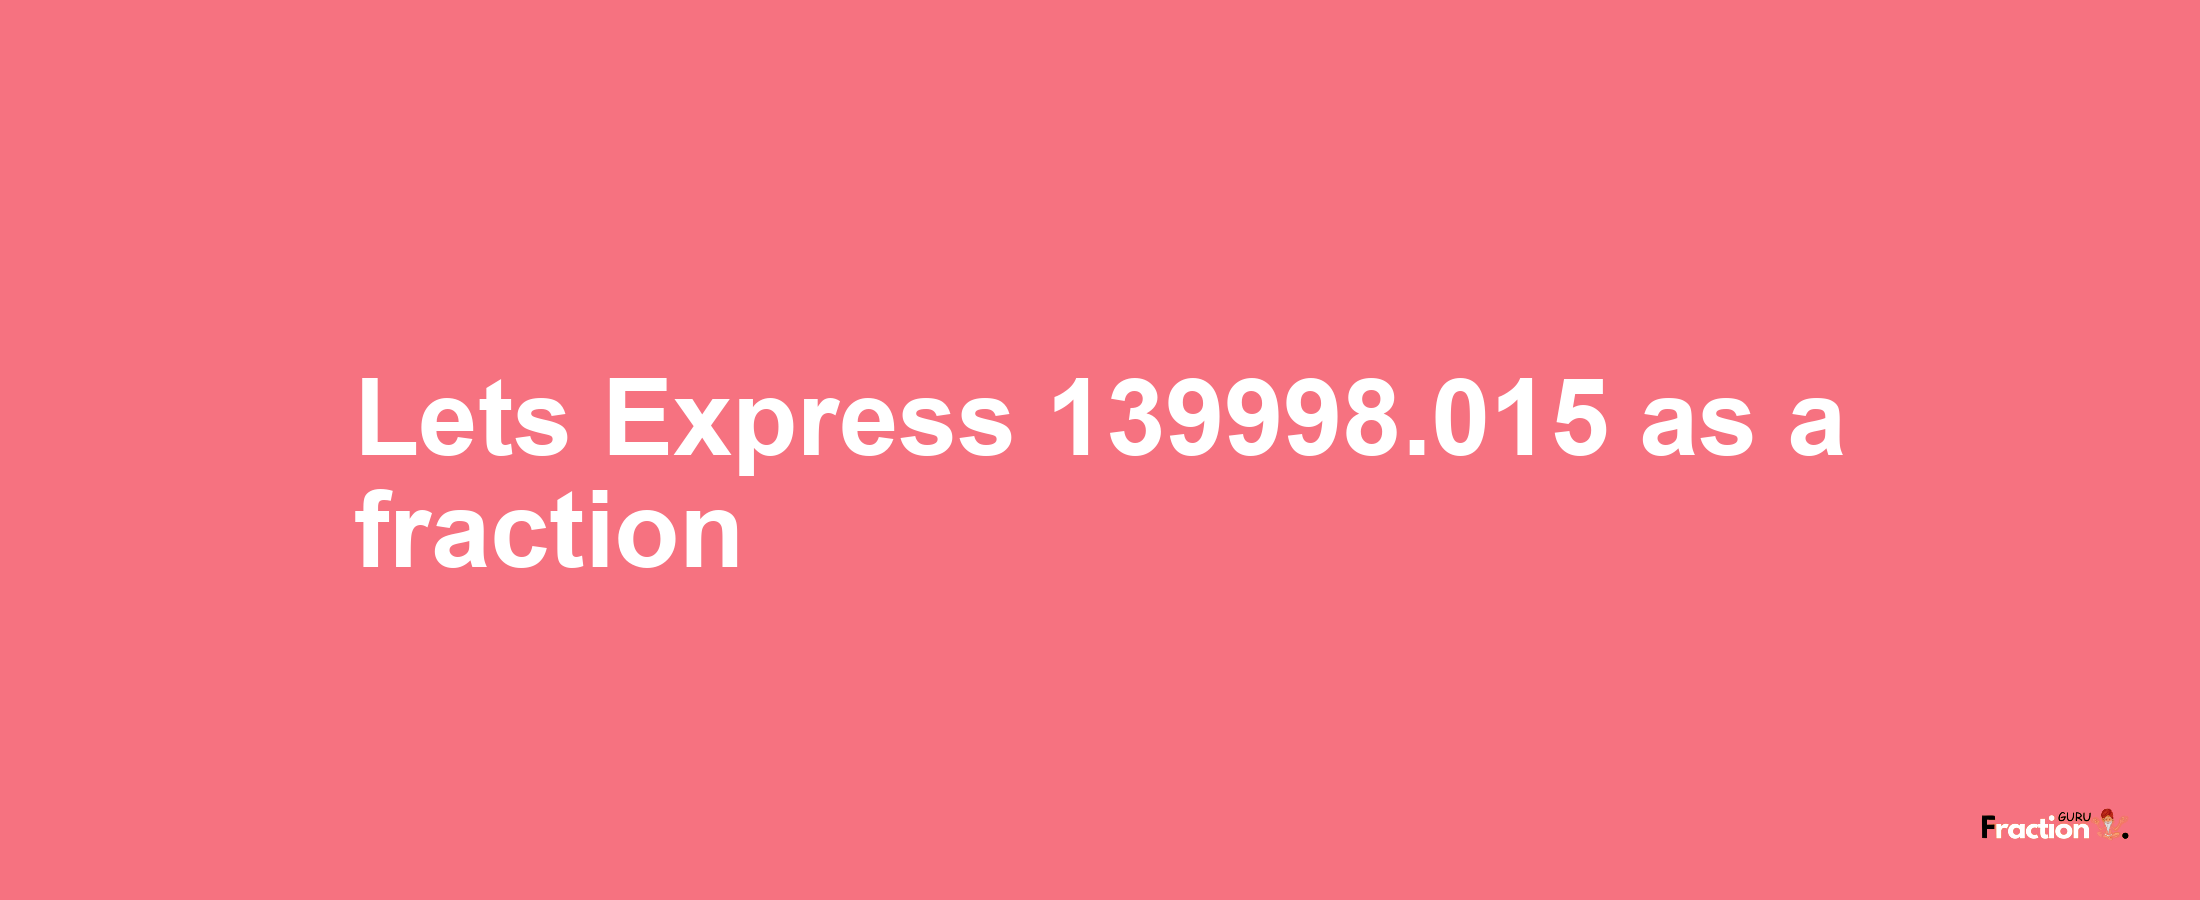 Lets Express 139998.015 as afraction